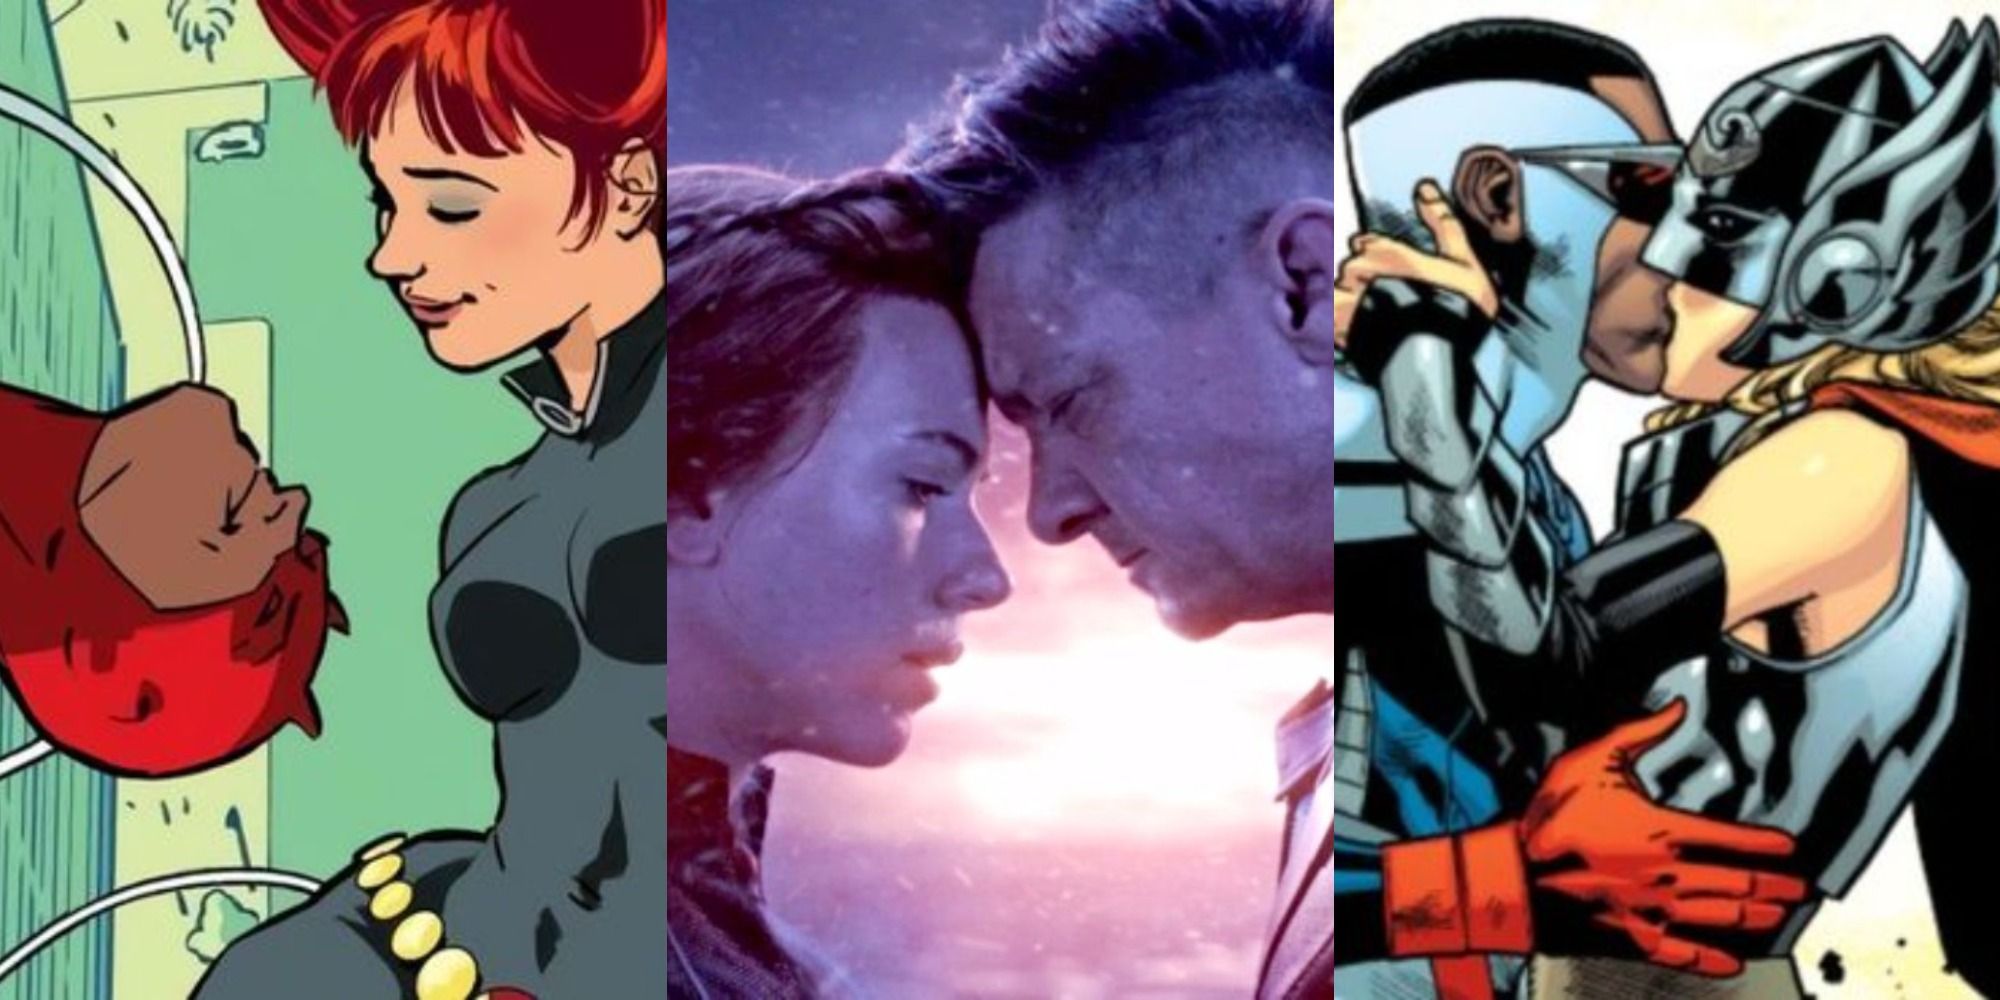 Split image of Hawkeye and Black Widow in Avengers Endgame flanked by comic versions of Black Widdow and Daredevil and Falcon and Jane Foster kissing